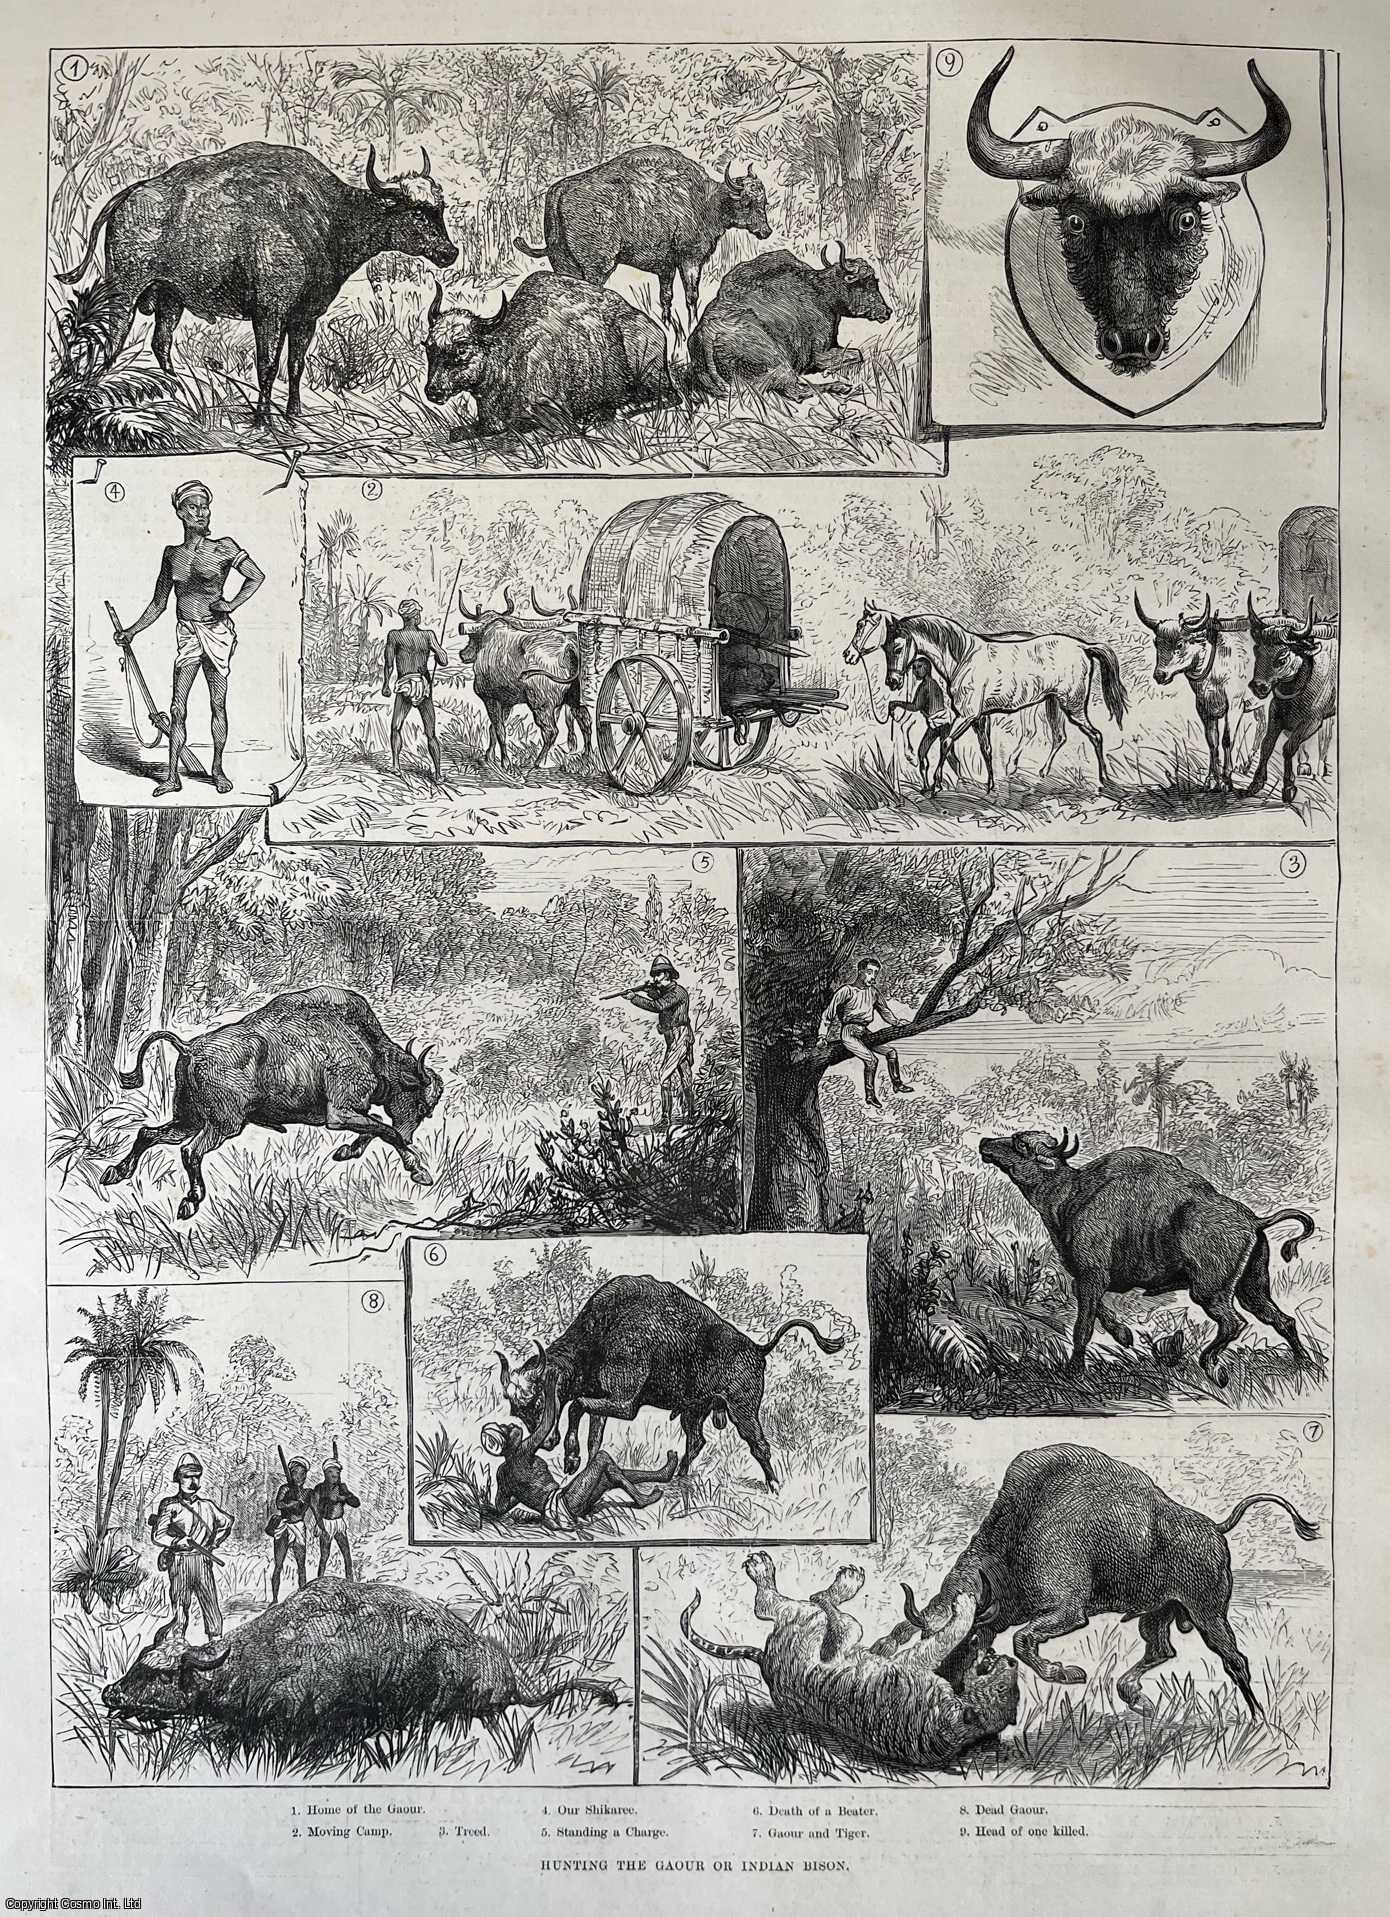 BISON HUNTING - Hunting the Gaour or Indian Bison. A collection of original woodcut engravings, with brief accompanying text overleaf, from the Illustrated London News, 1887.